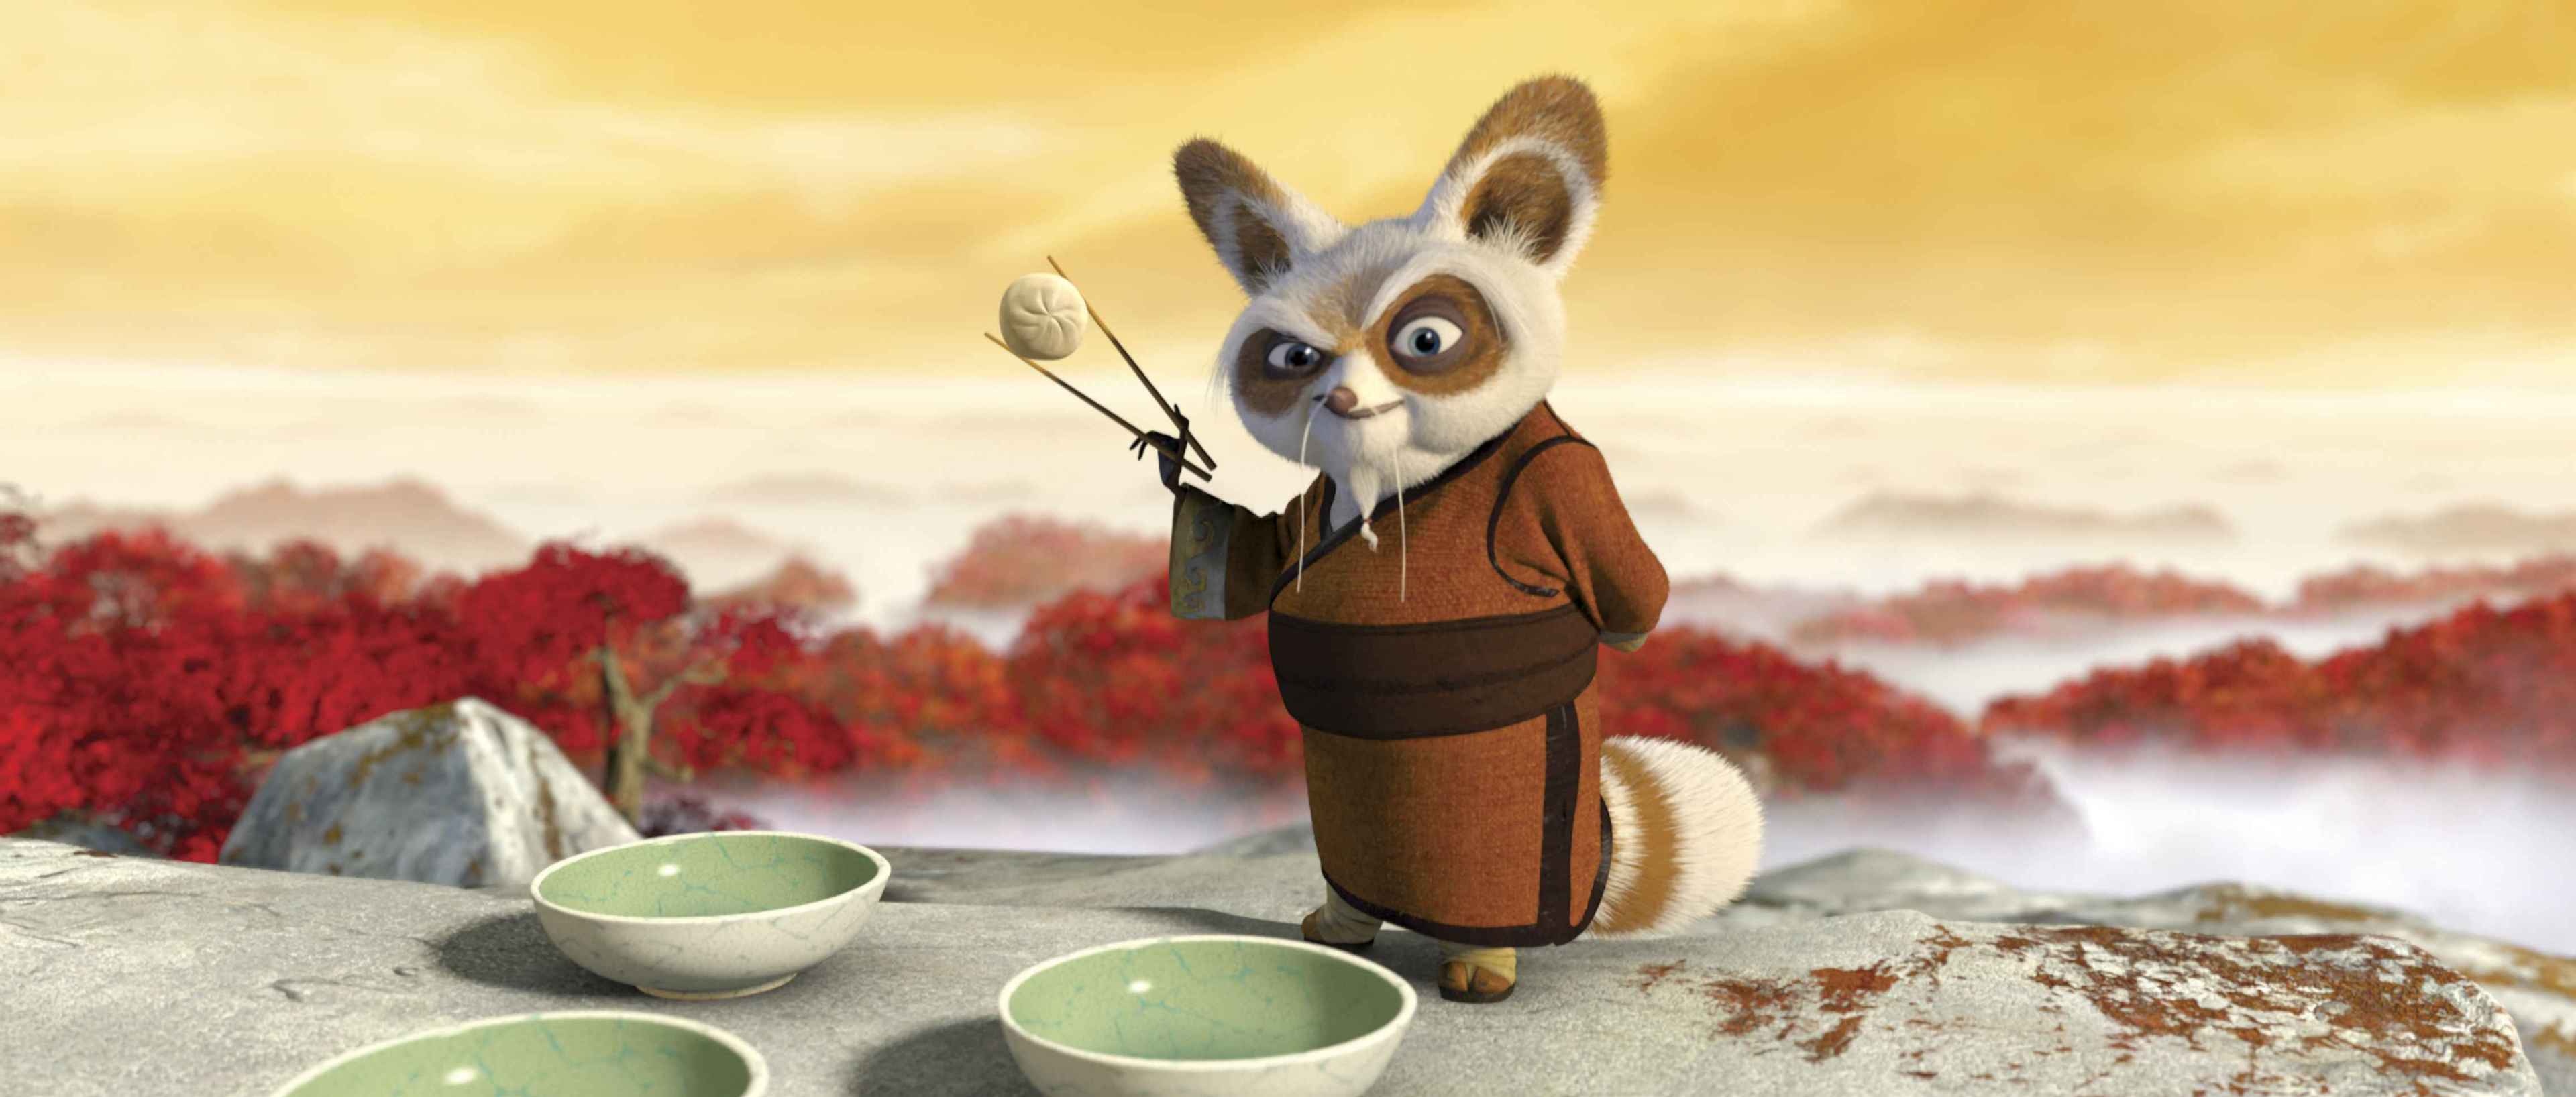 Master Shifu: If you only do what you can do, you will never be more than you are now. 3840x1640 Dual Screen Background.